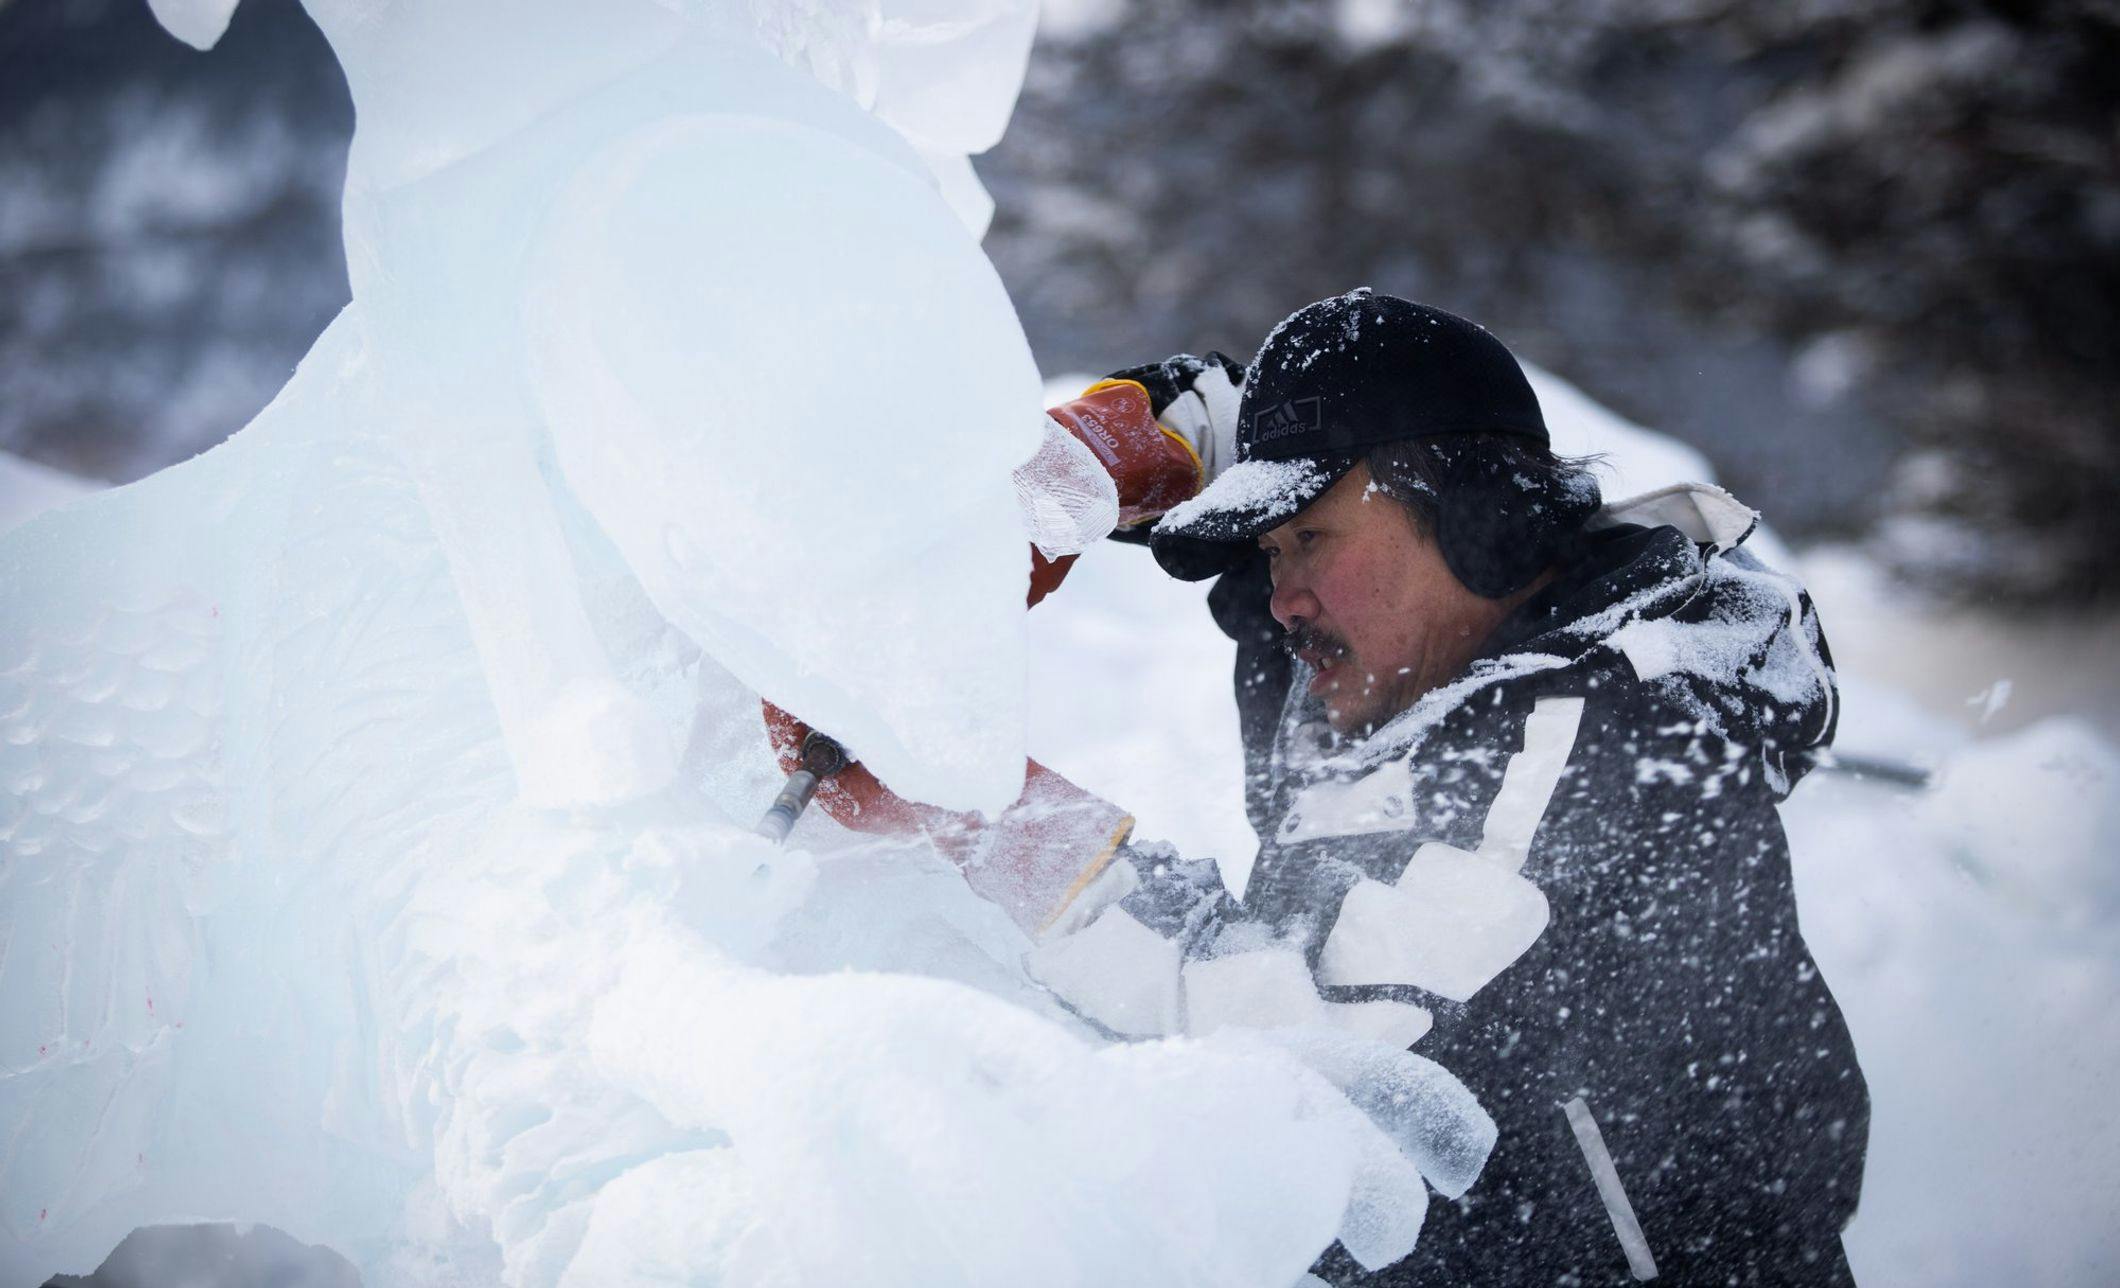 An ice carver using tools to work on a giant ice sculpture